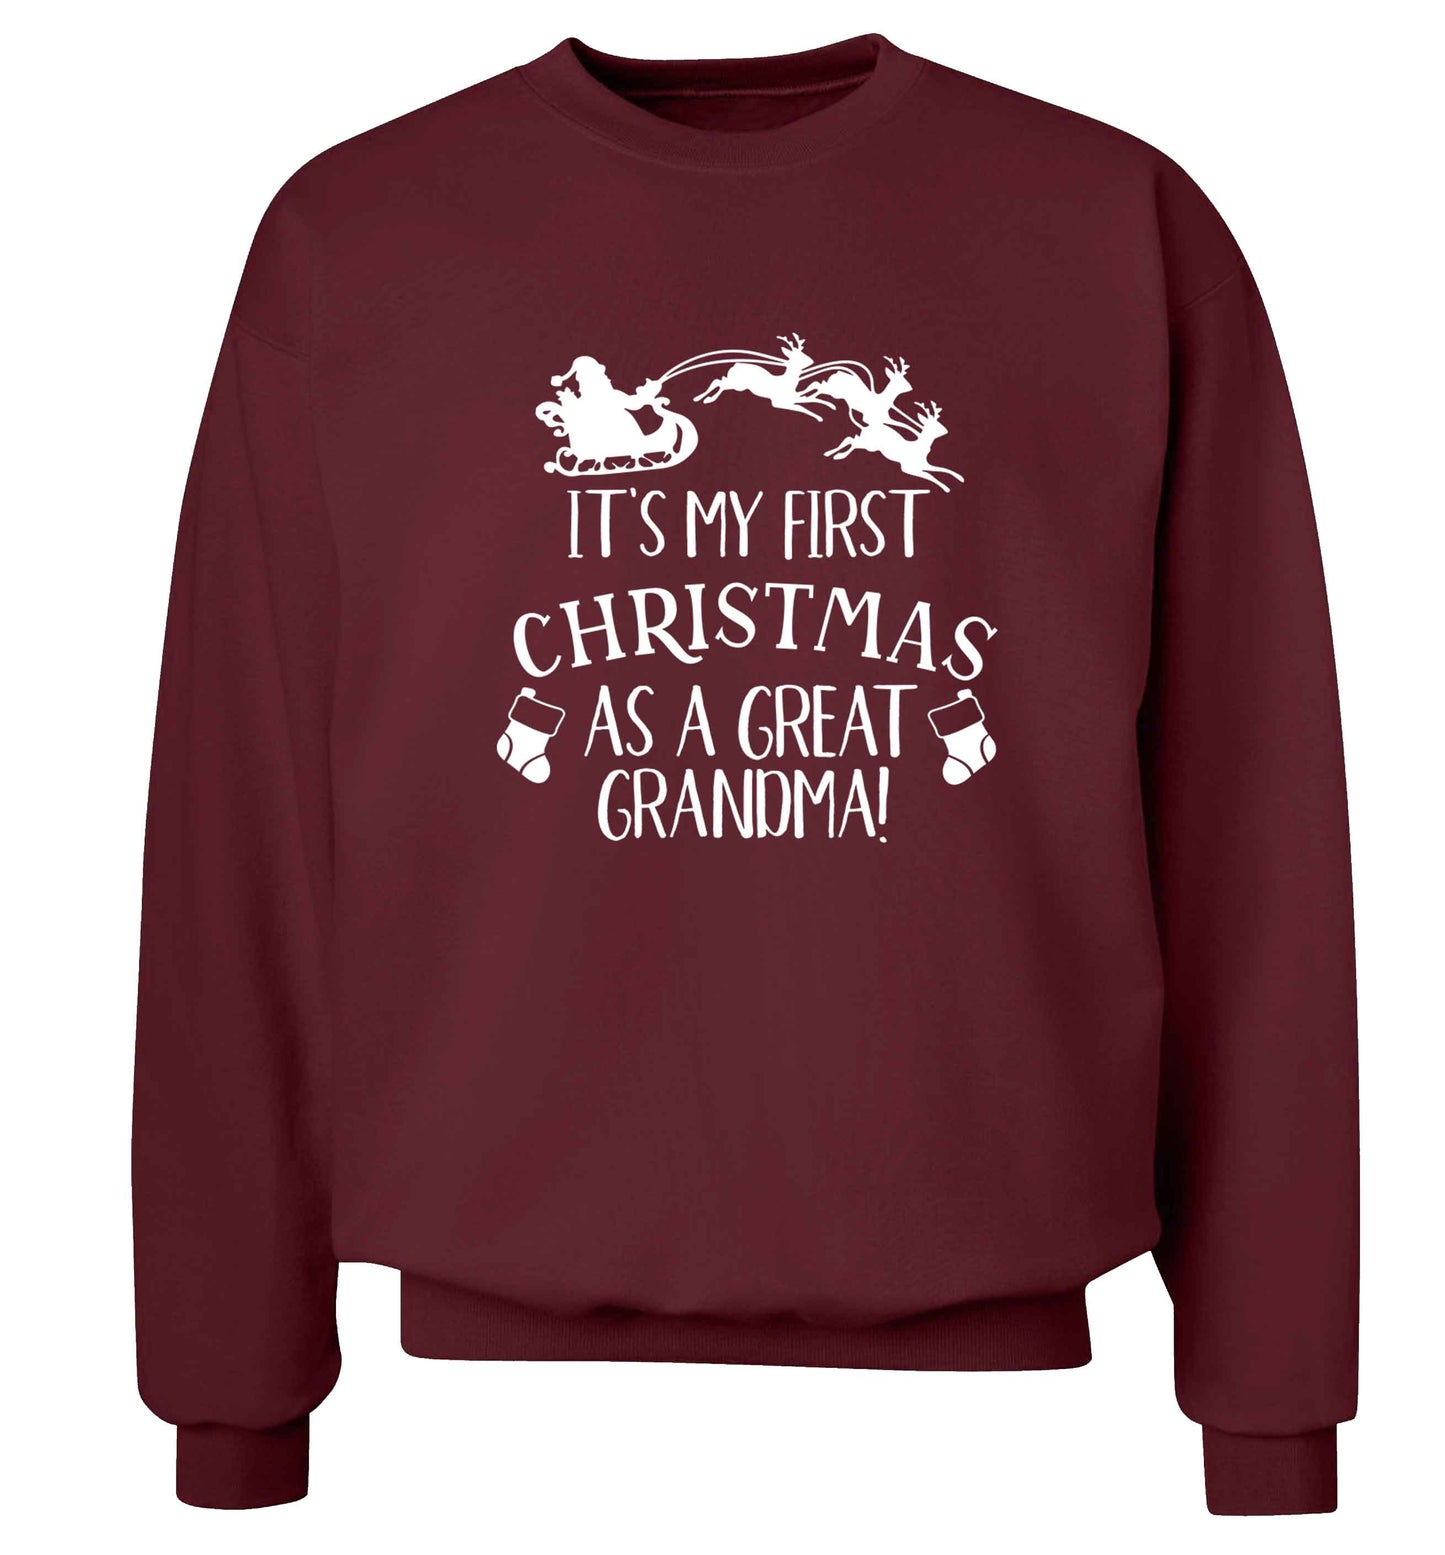 It's my first Christmas as a great grandma! Adult's unisex maroon Sweater 2XL